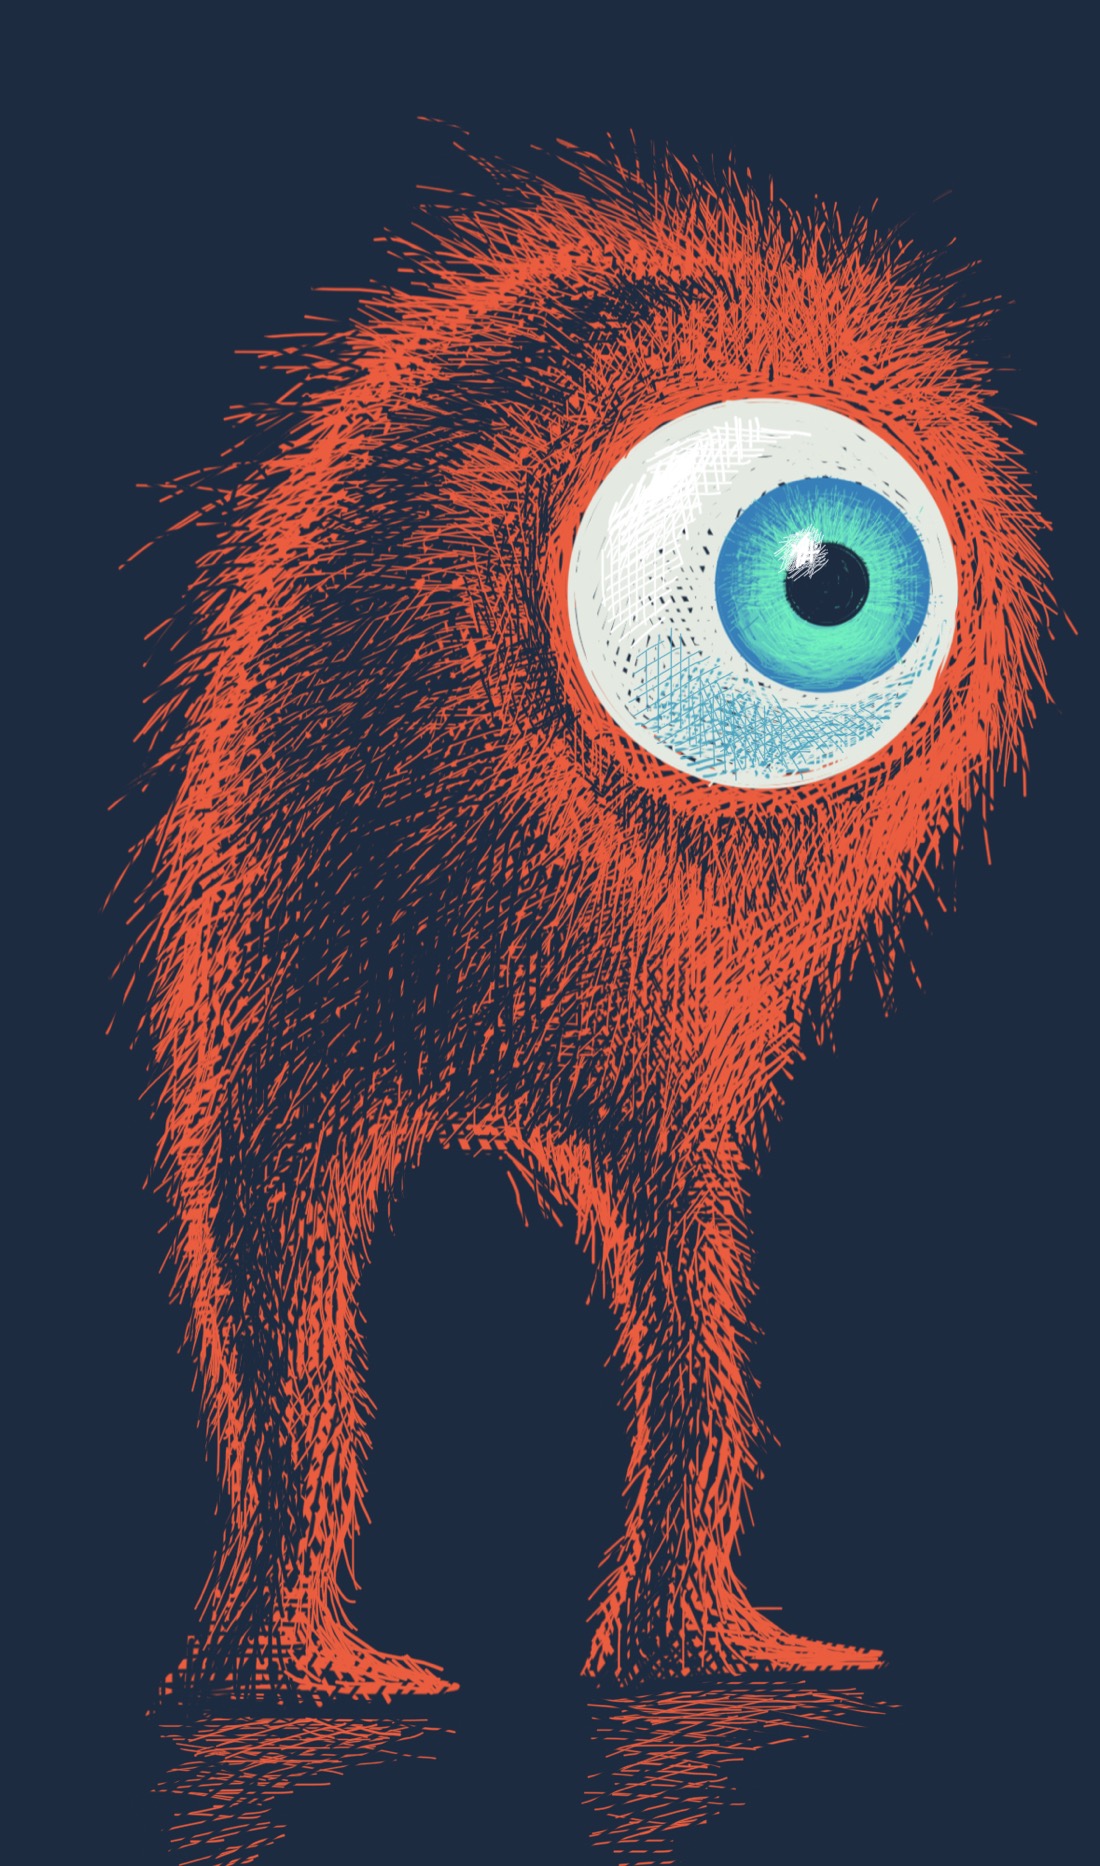 A bright red-orange furry creature with a single prominent blue-green eye stands on a dark reflective surface, in a dark place, looking right.